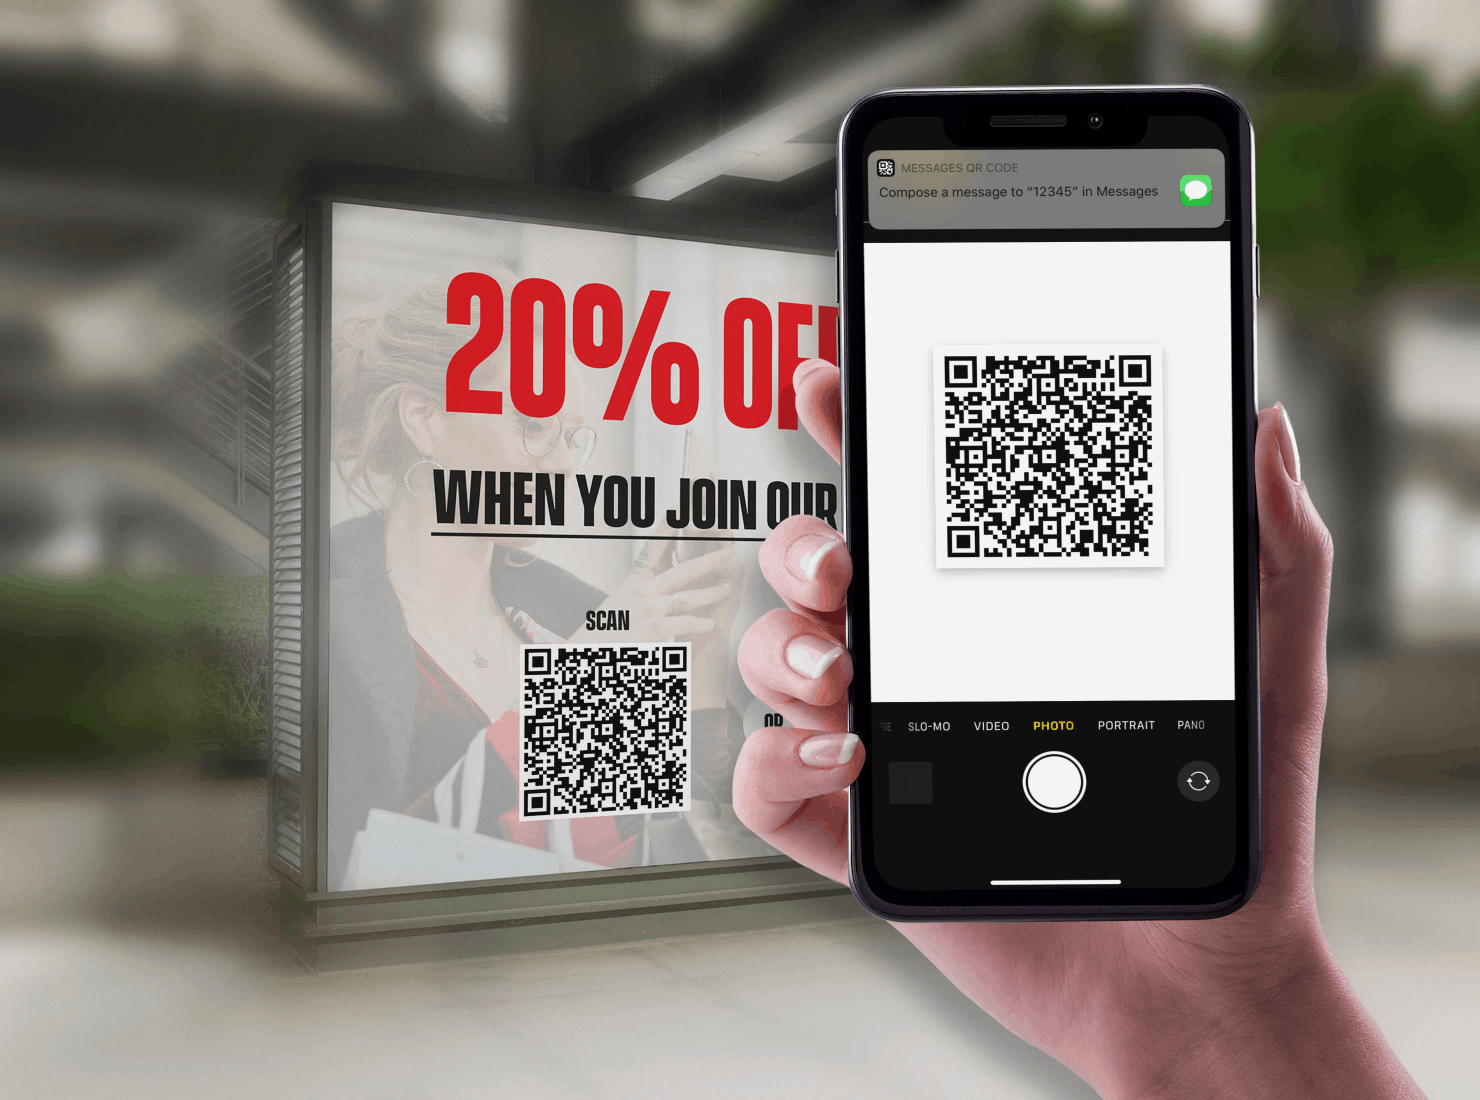 SMS Marketing with QR Codes - Step 2 Scan QR Code on Mobile Phone